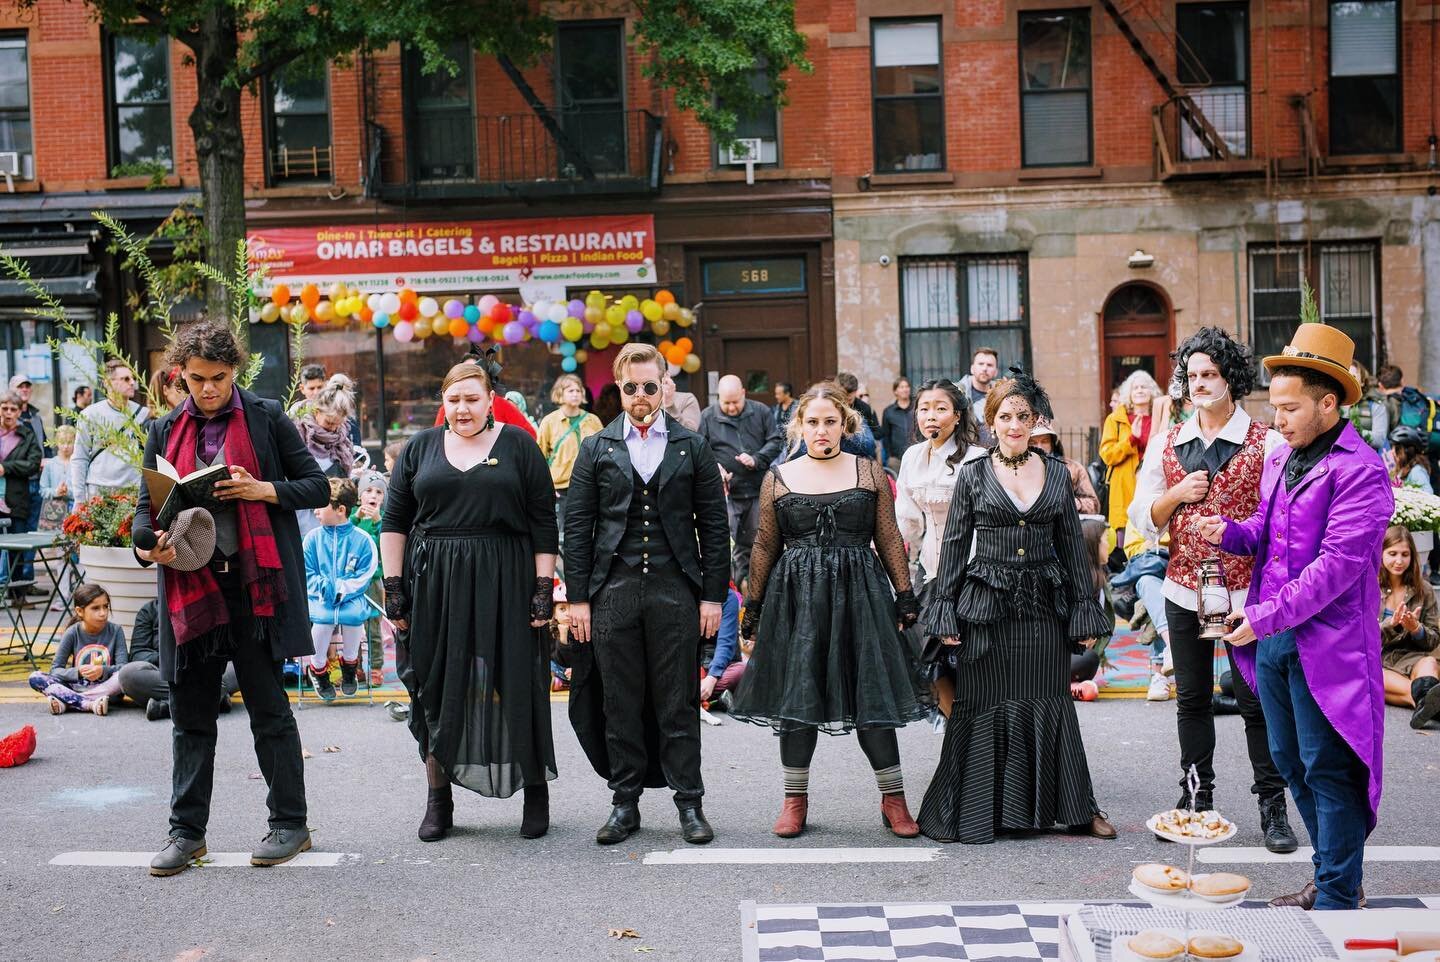 Attend the Tale of Sweeney Todd&hellip; on a street in Brooklyn&hellip; 😈

What an incredible Halloween show we had on Saturday! Thank you @vanderbiltopenstreets for having us and to all who stopped by with blankets, chairs, costumes and cheered us 